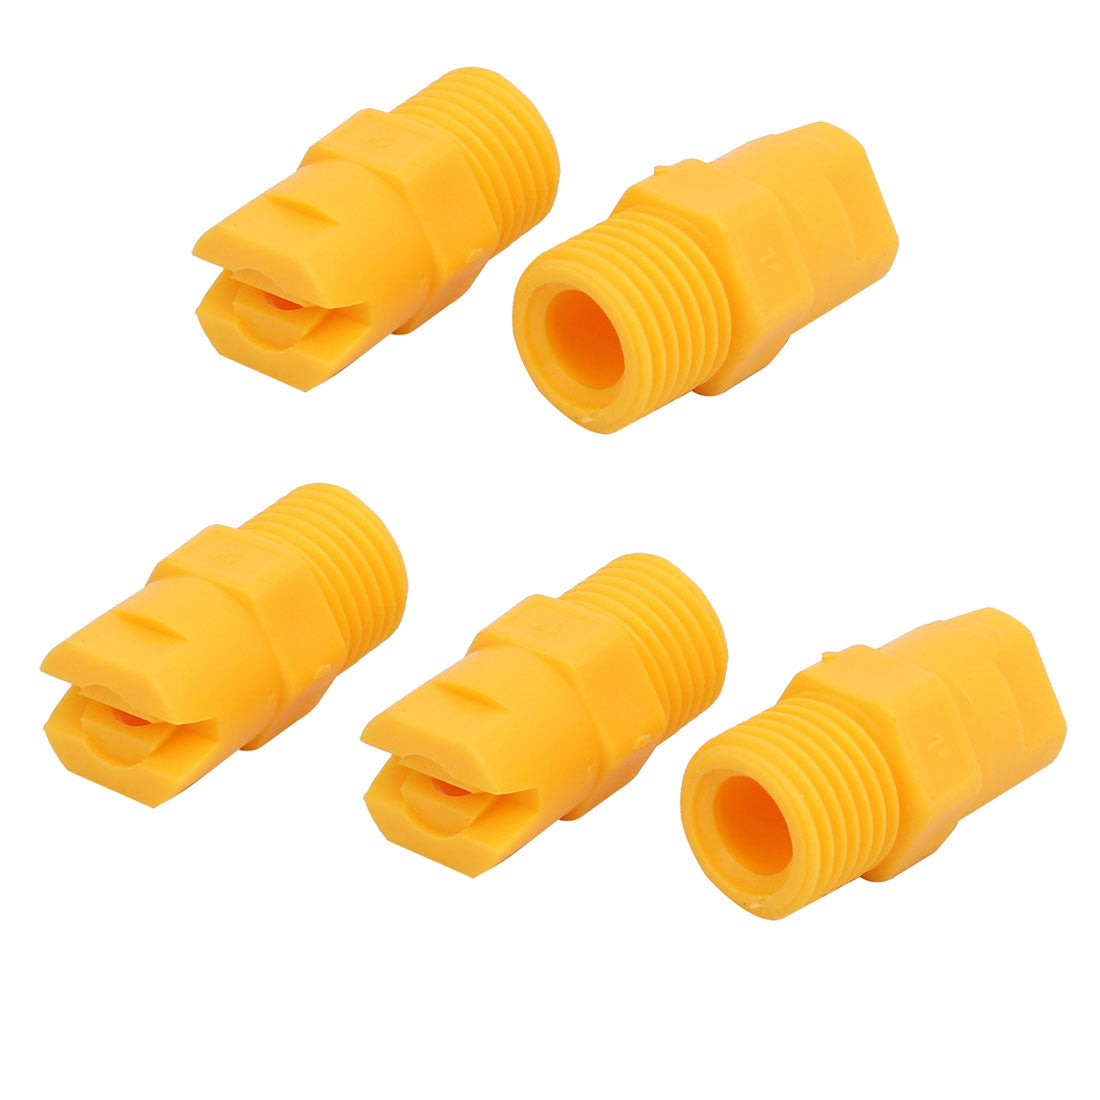 uxcell Uxcell 1/4PT Male Inlet 85 Degree Standard Flat Fan Spray Tip Yellow 5pcs